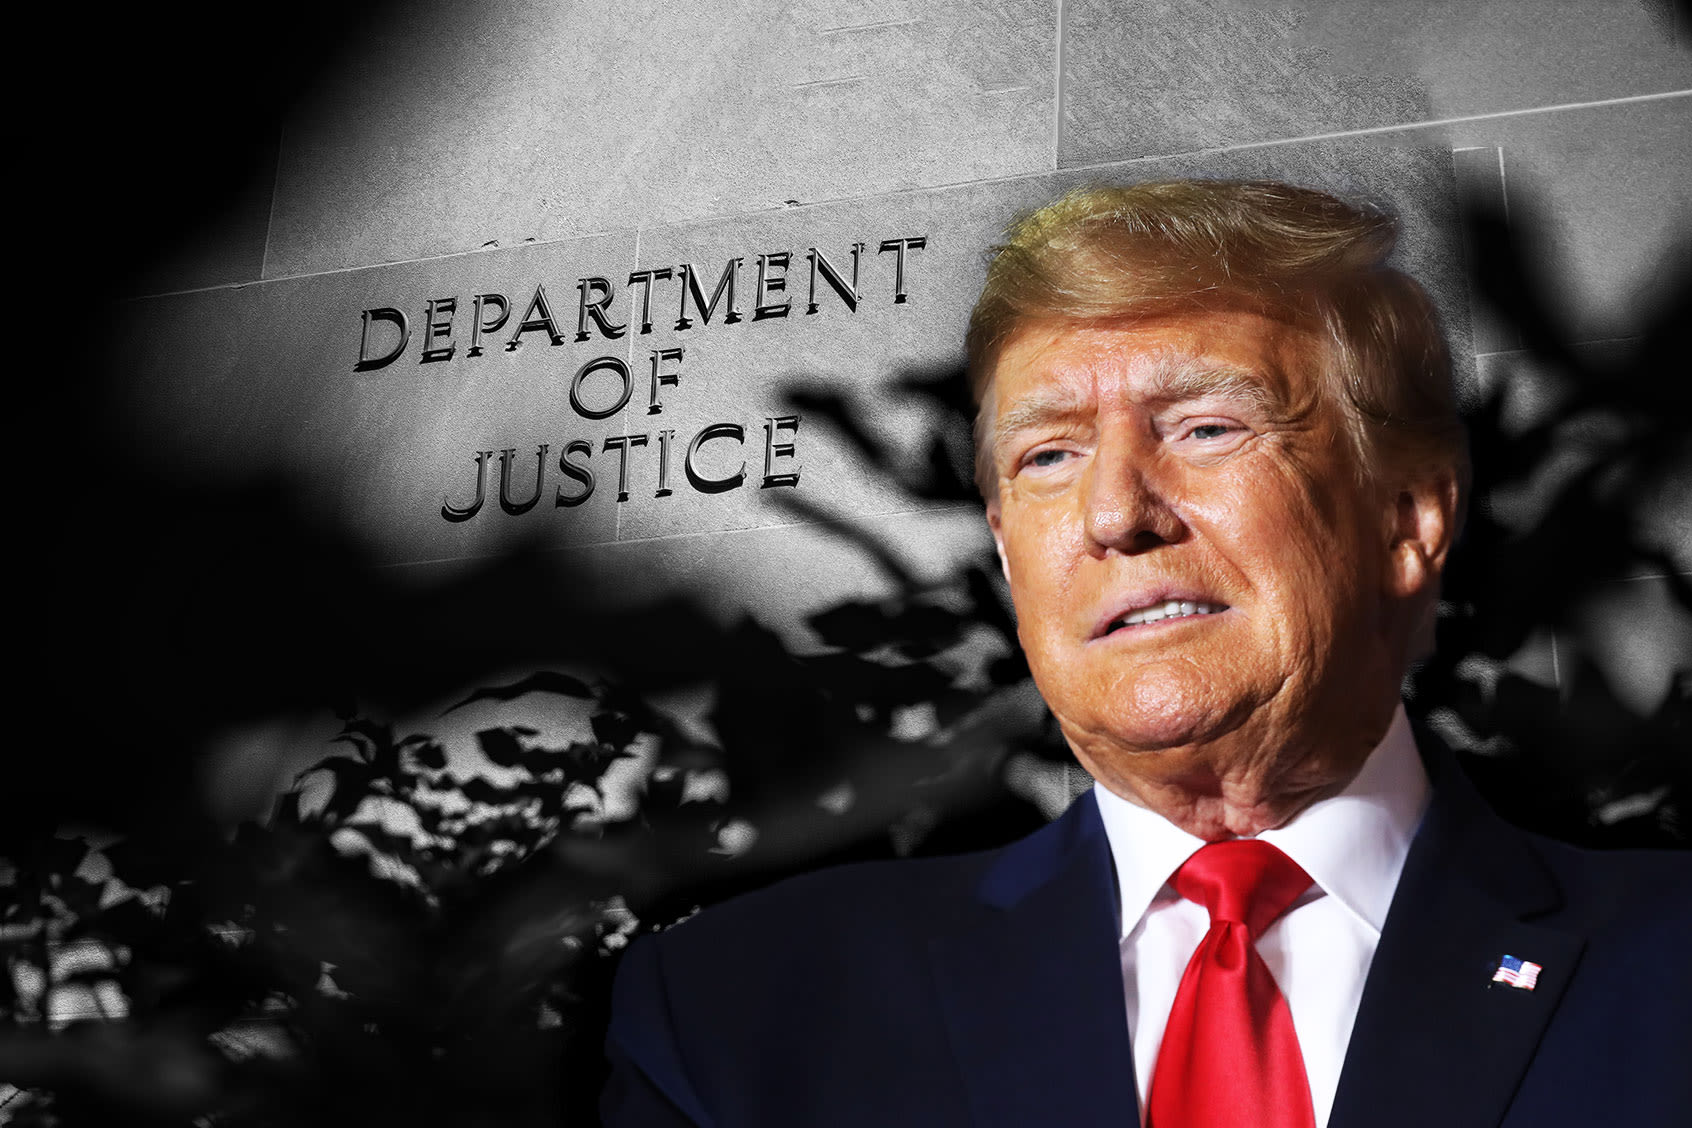 Trump allies are planning a "purge" of the Justice Department, hoping to eliminate checks on power